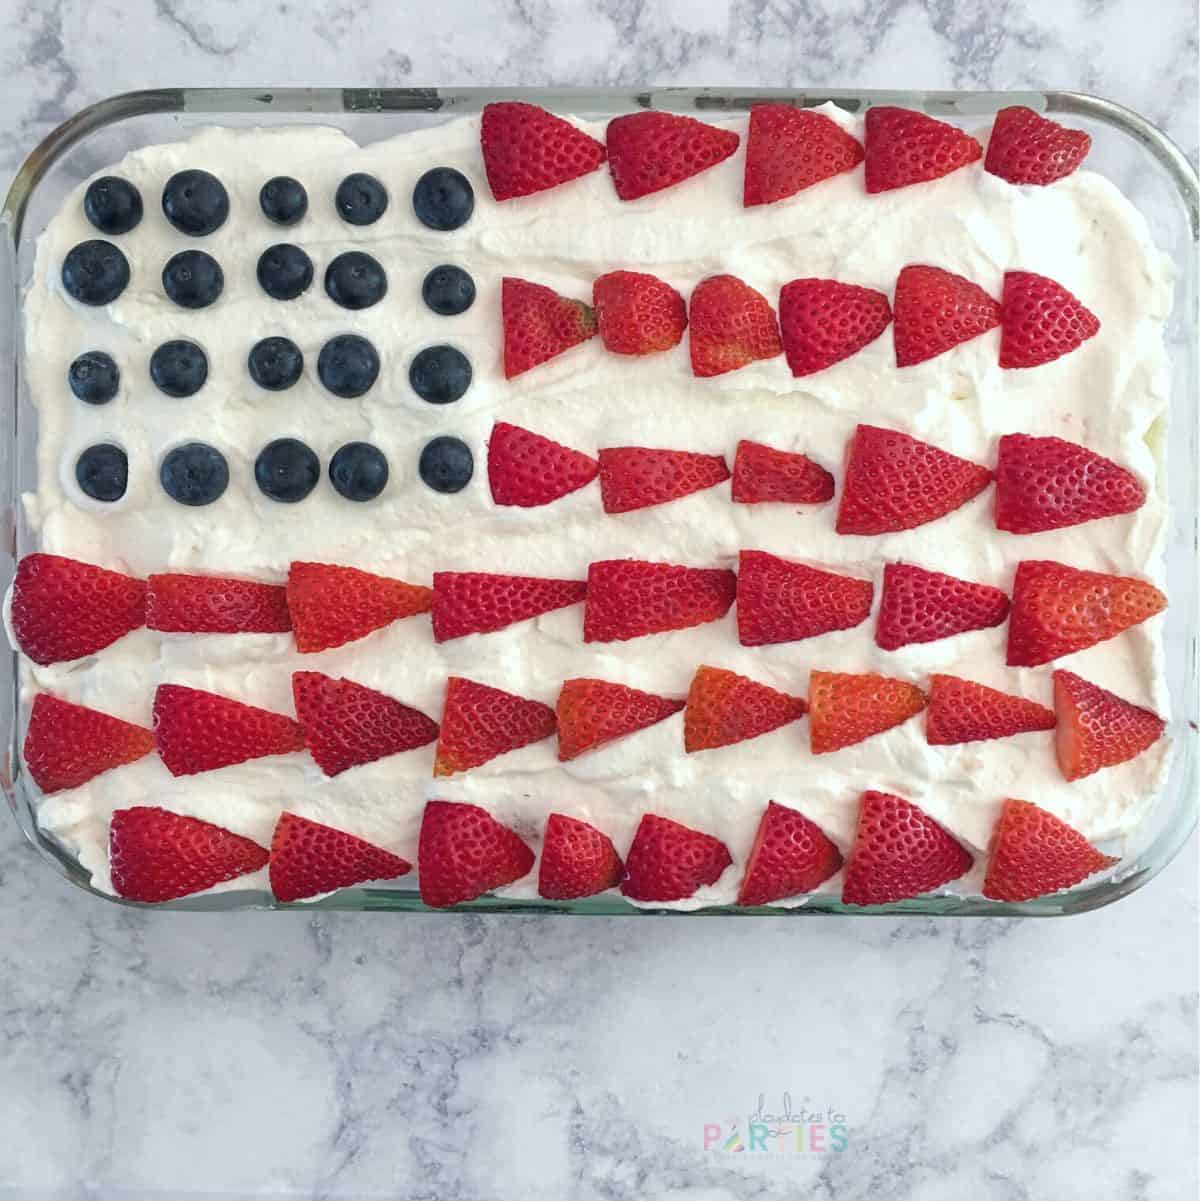 A sheet cake decorated with strawberries and blueberries to look like an American Flag cake.